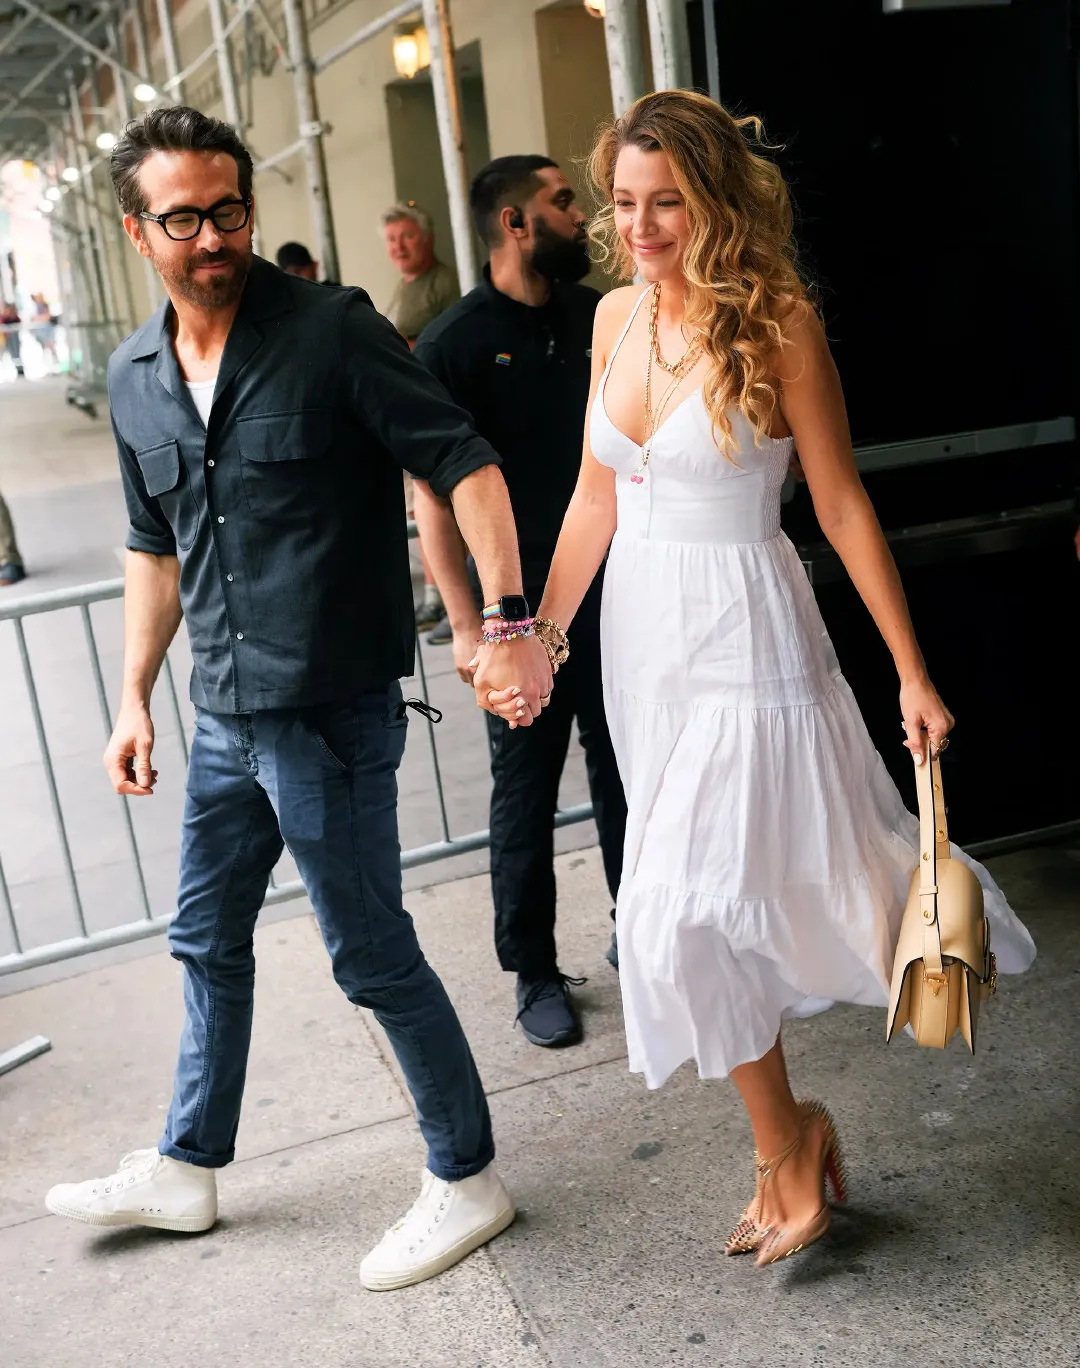 Blake Lively is pregnant, this will be she and Ryan Reynolds' fourth child | FMV6